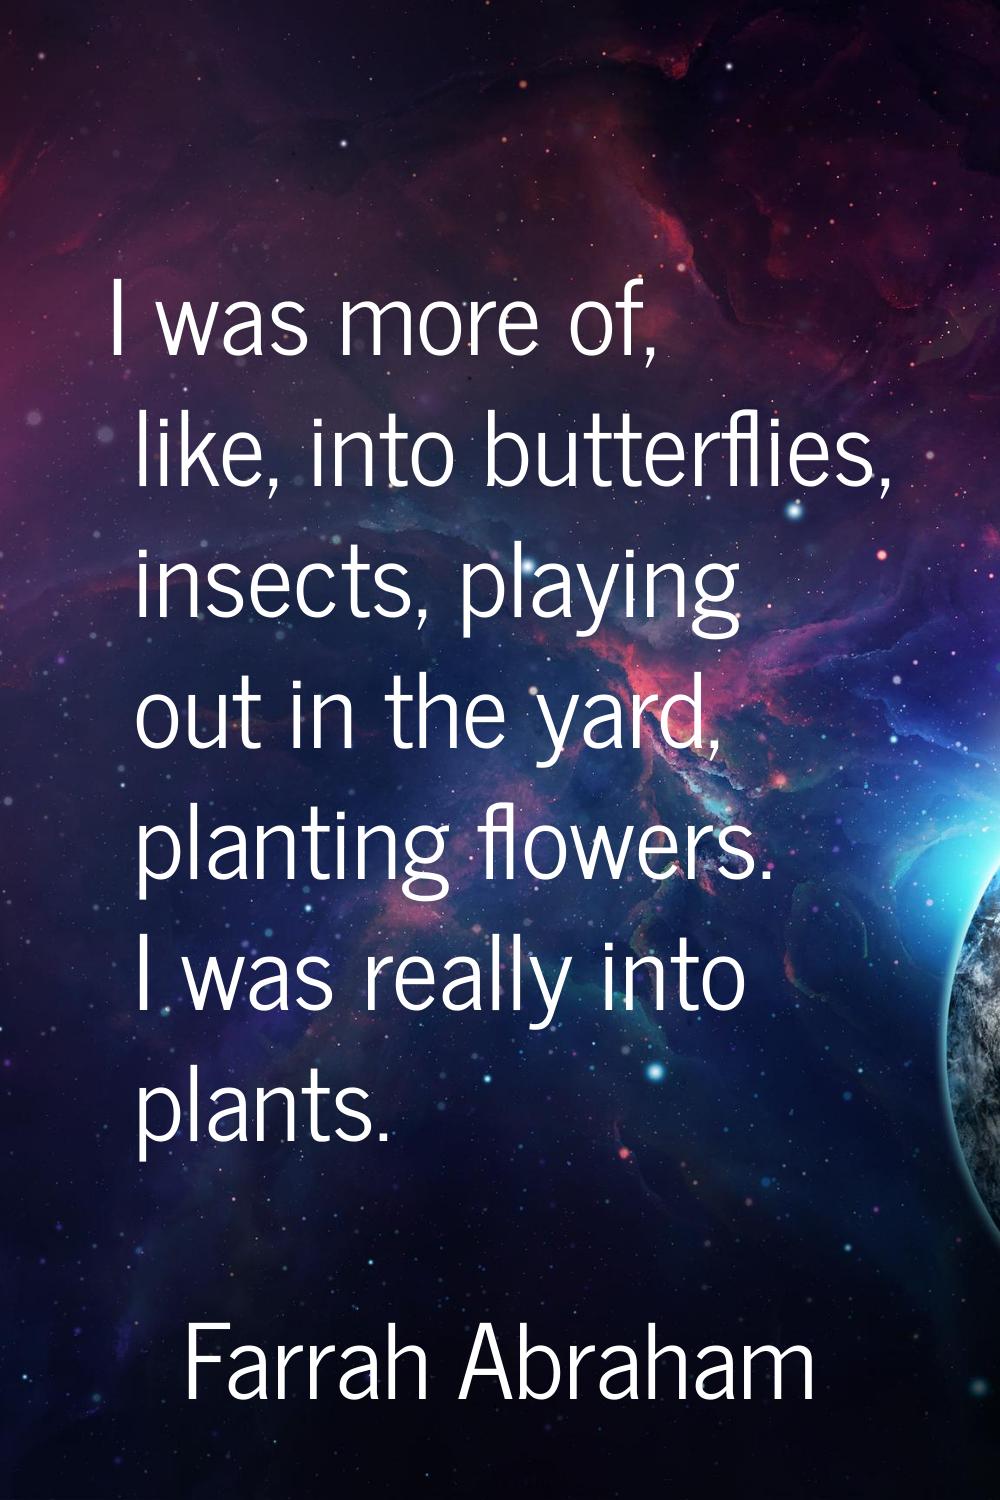 I was more of, like, into butterflies, insects, playing out in the yard, planting flowers. I was re